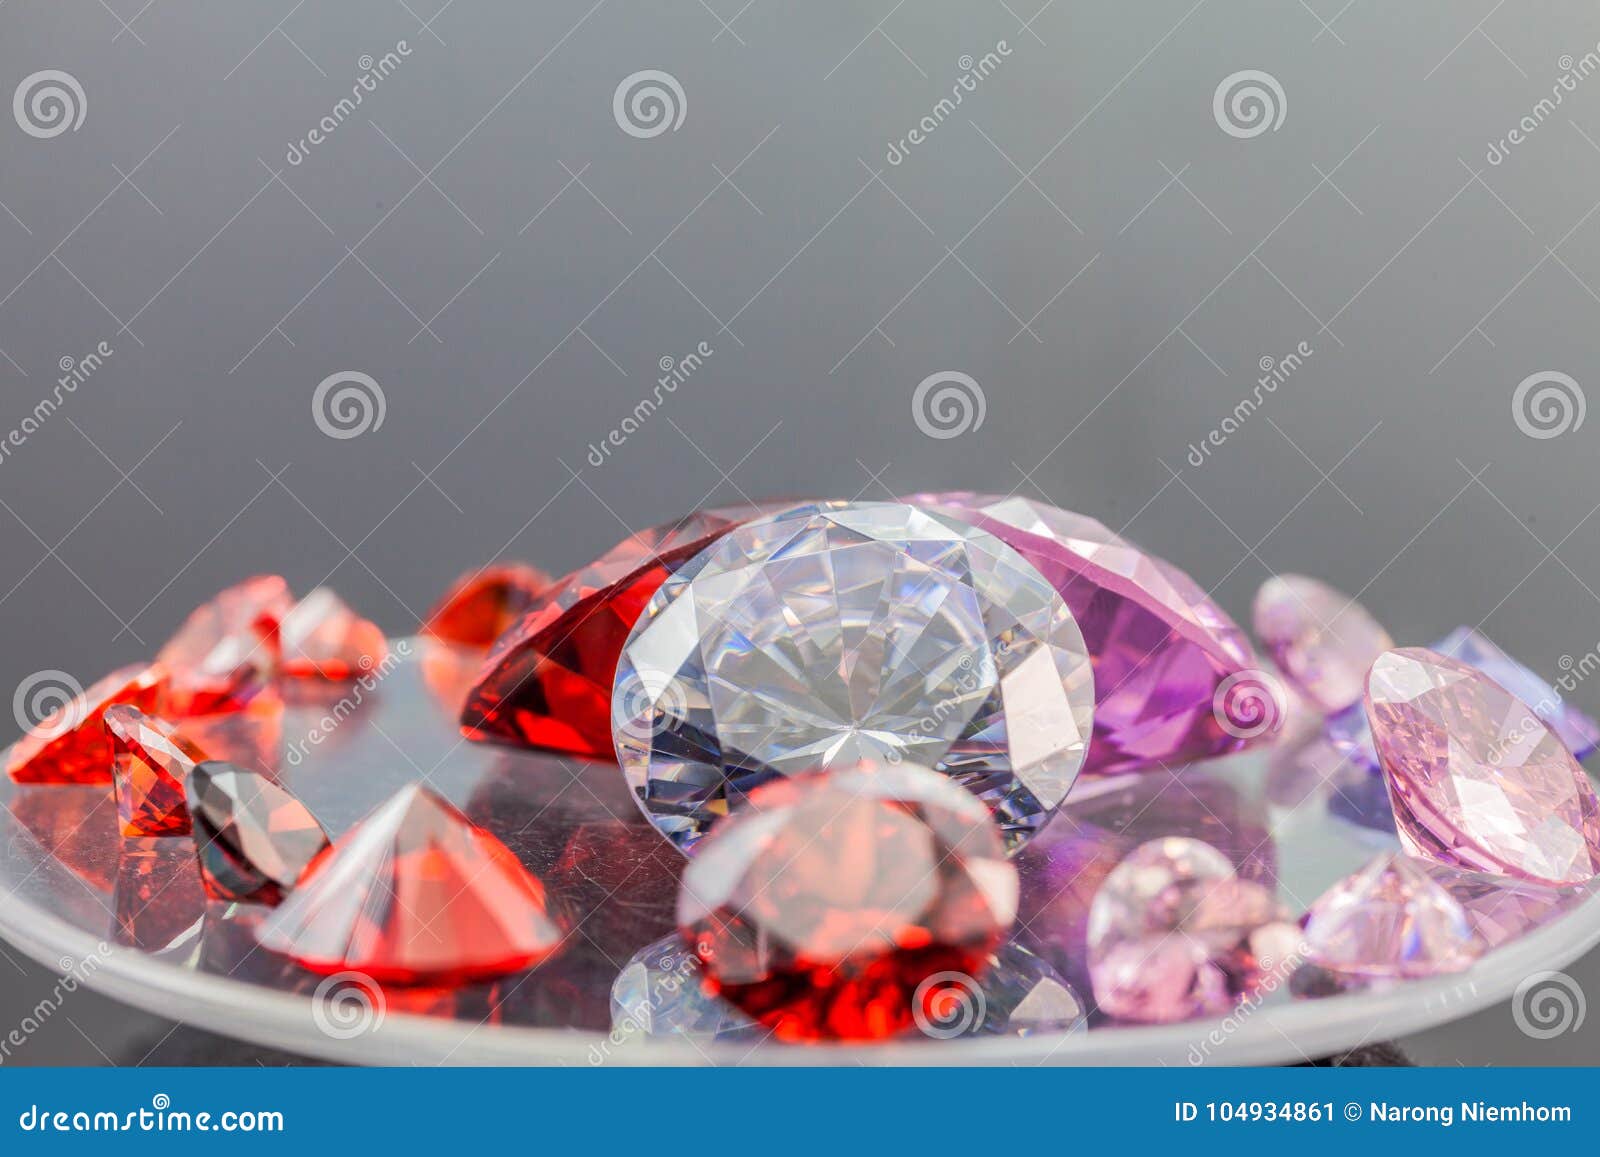 colorful gems on white background